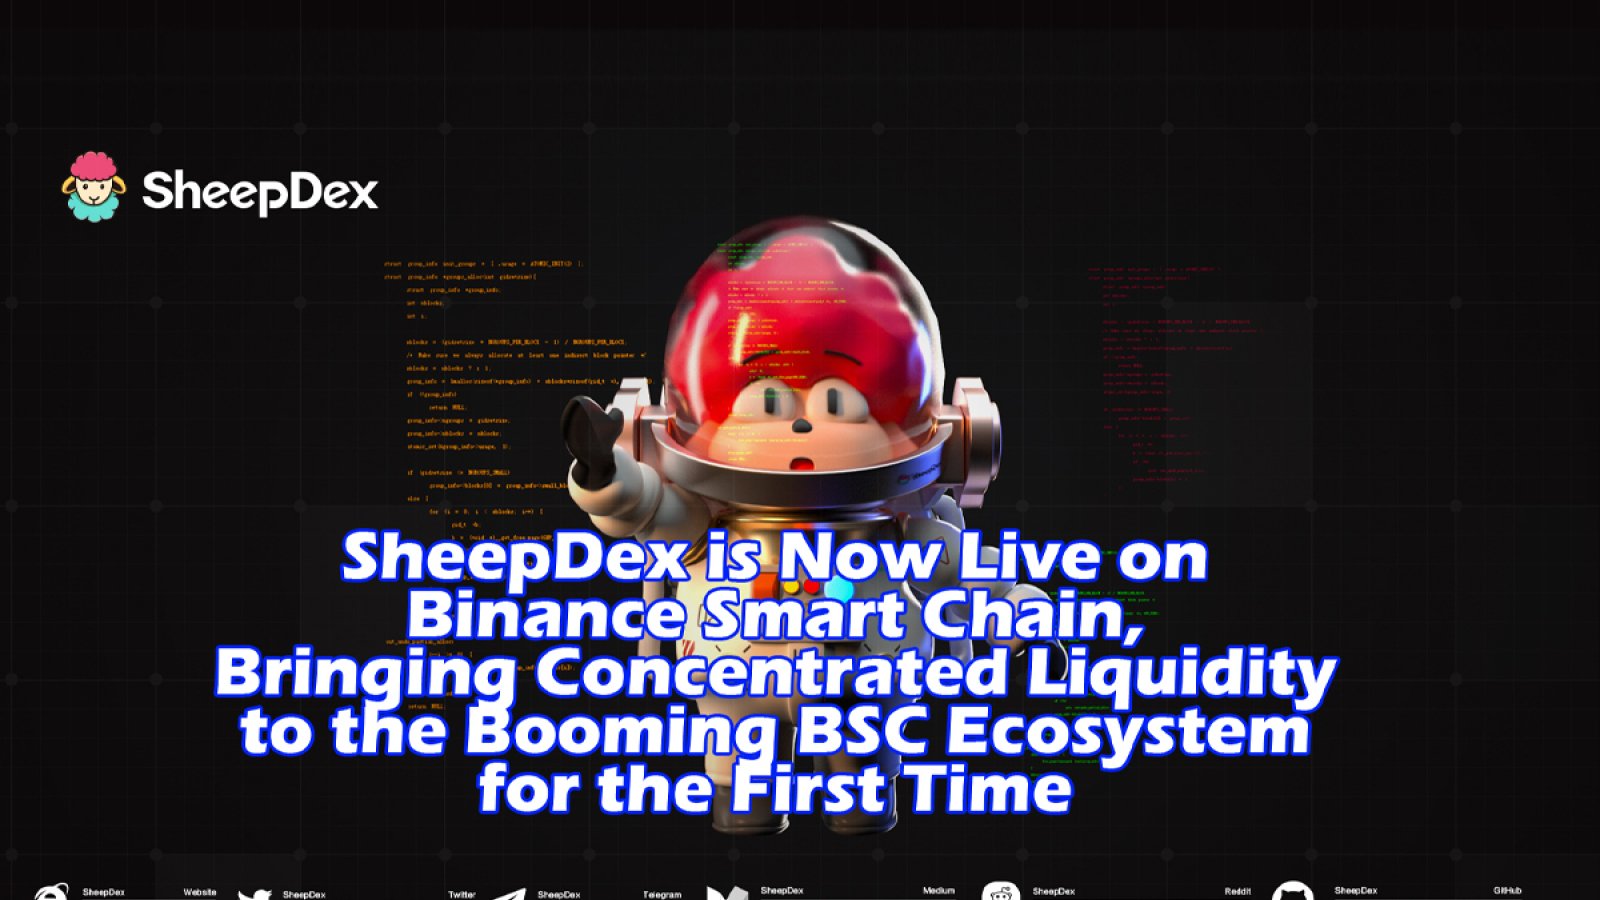 SheepDex is Now Live on Binance Smart Chain, Bringing Concentrated Liquidity to the Booming BSC Ecosystem for the First Time